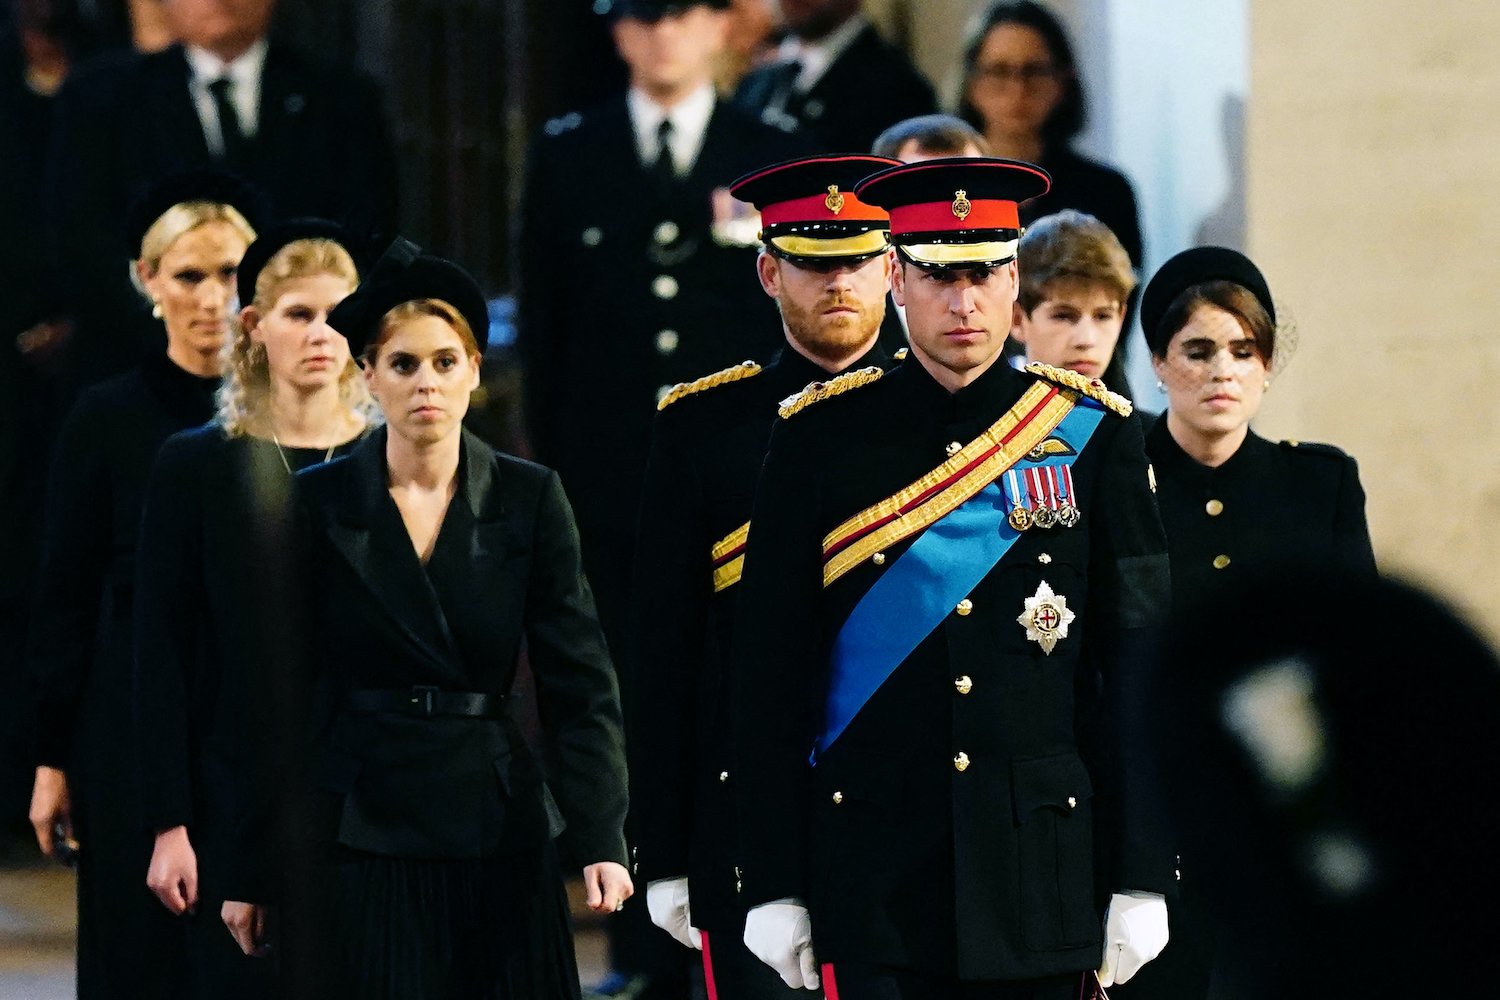 Prince William ‘Stepped Up’ as ‘Clear Leader’ at Queen’s Vigil, Body Language Expert Says